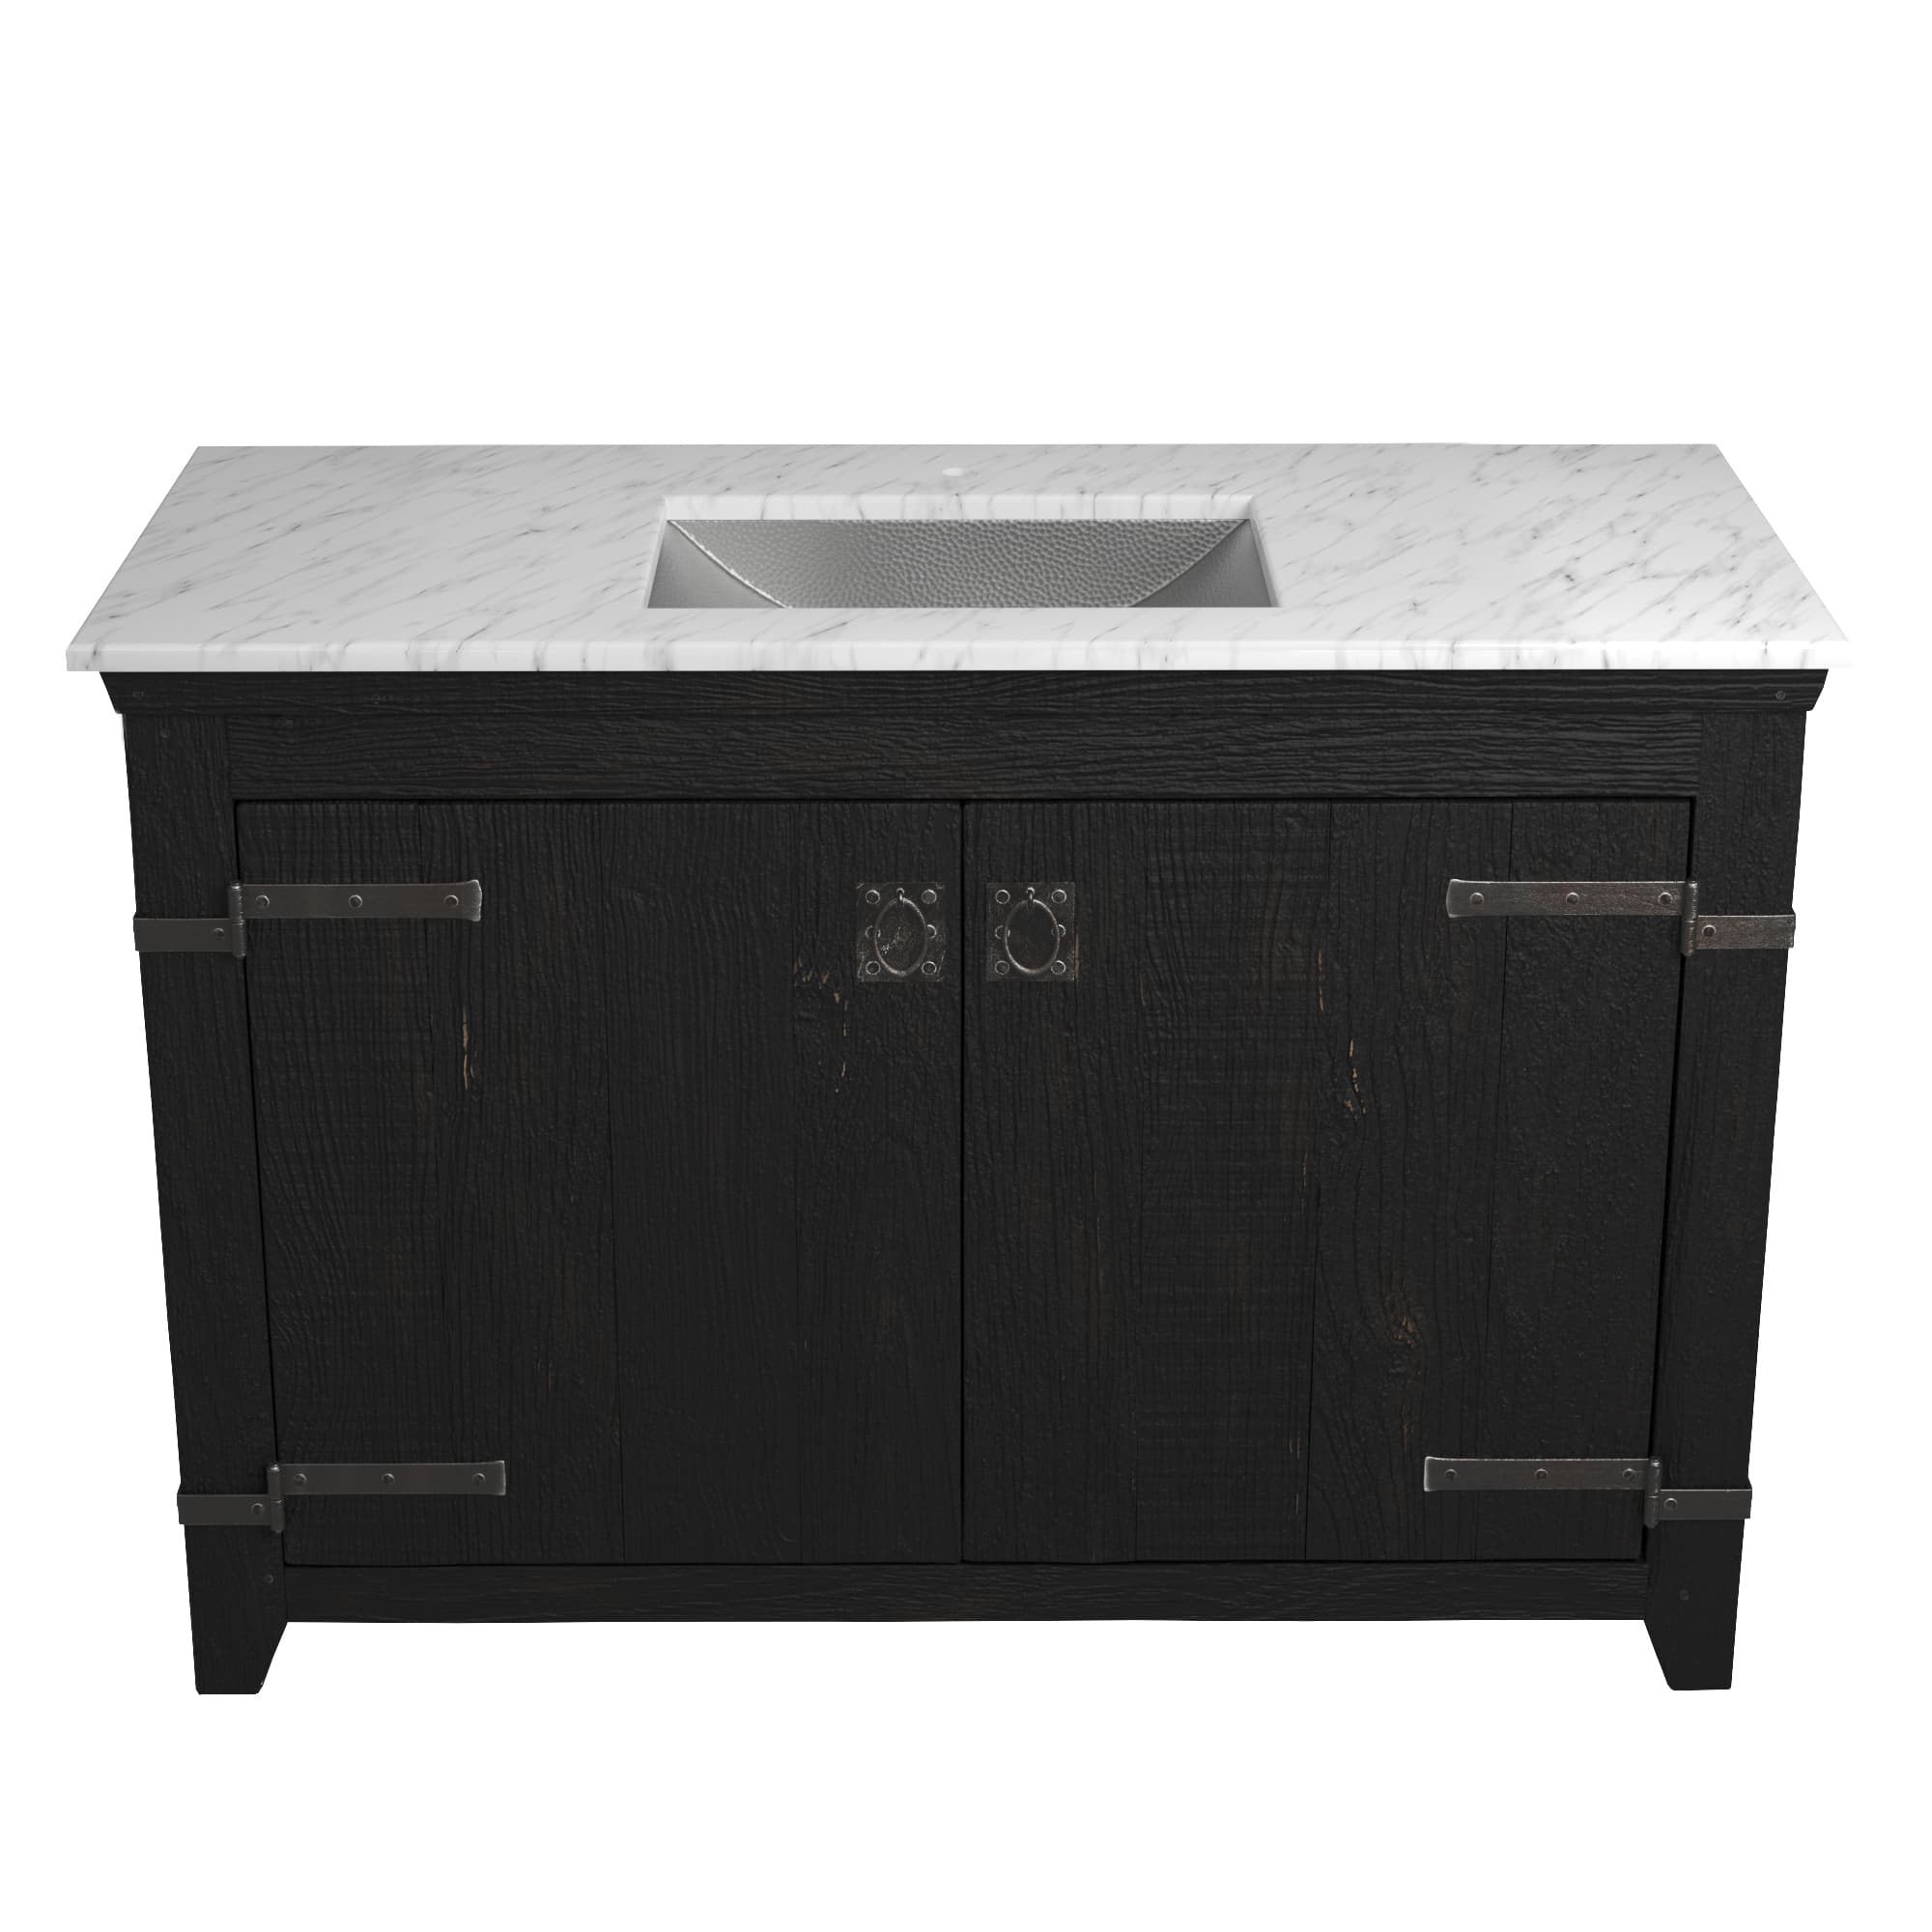 Native Trails 48" Americana Vanity in Anvil with Carrara Marble Top and Avila in Brushed Nickel, Single Faucet Hole, BND48-VB-CT-CP-021